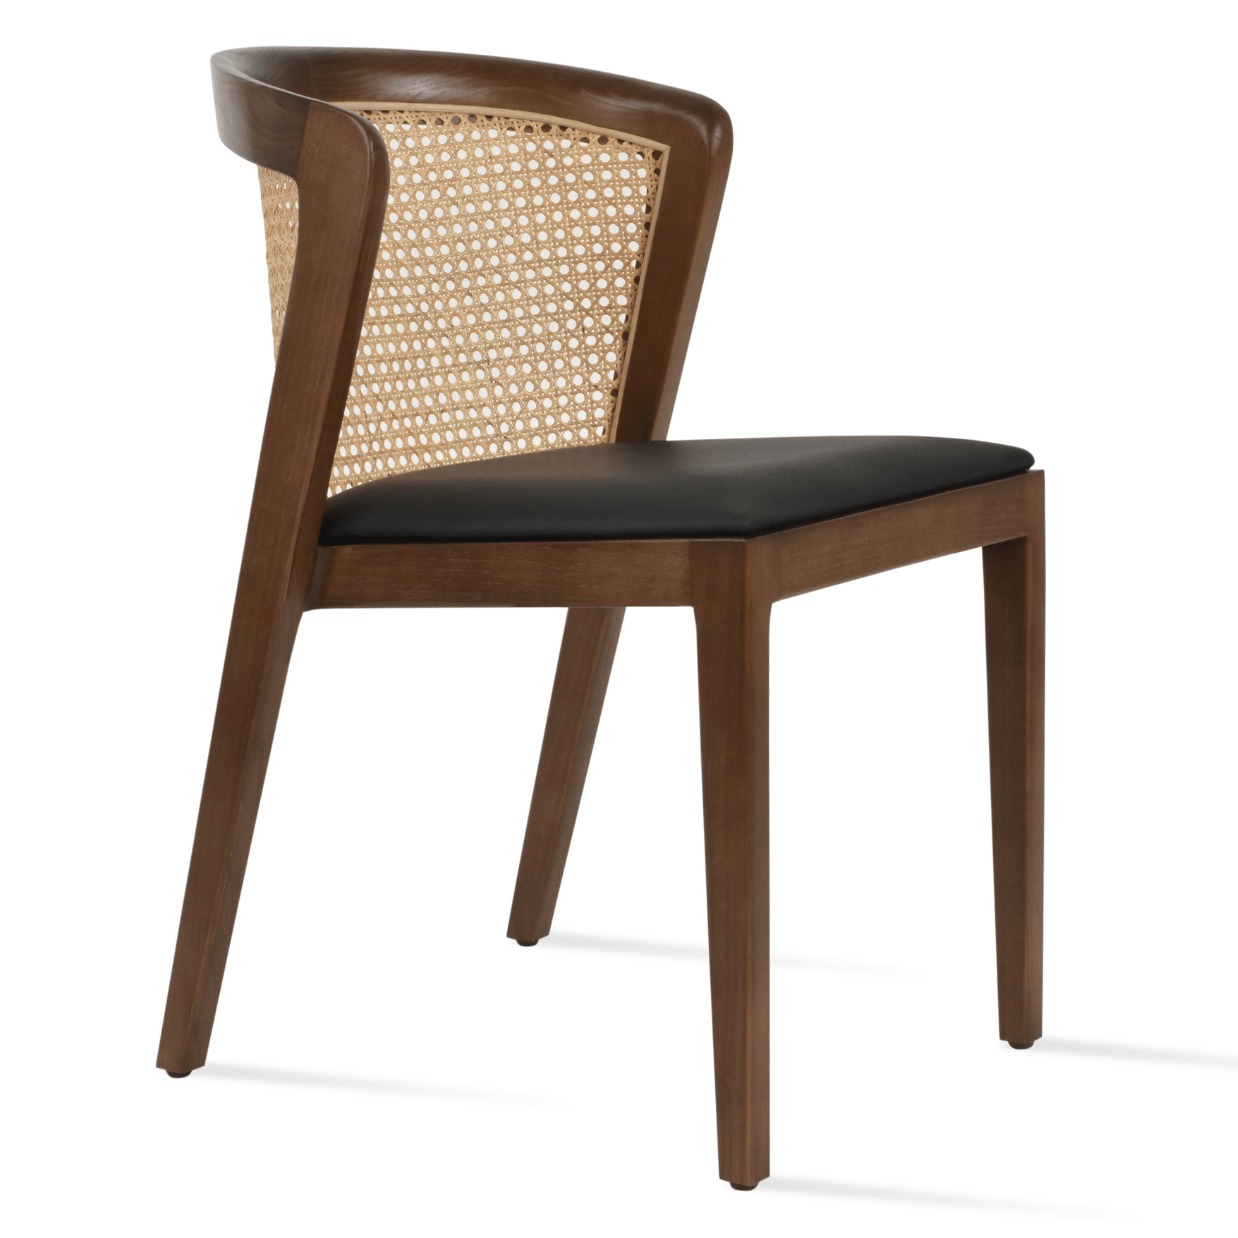 Curvy Caned Chairs Hatay - Your Bar Stools Canada